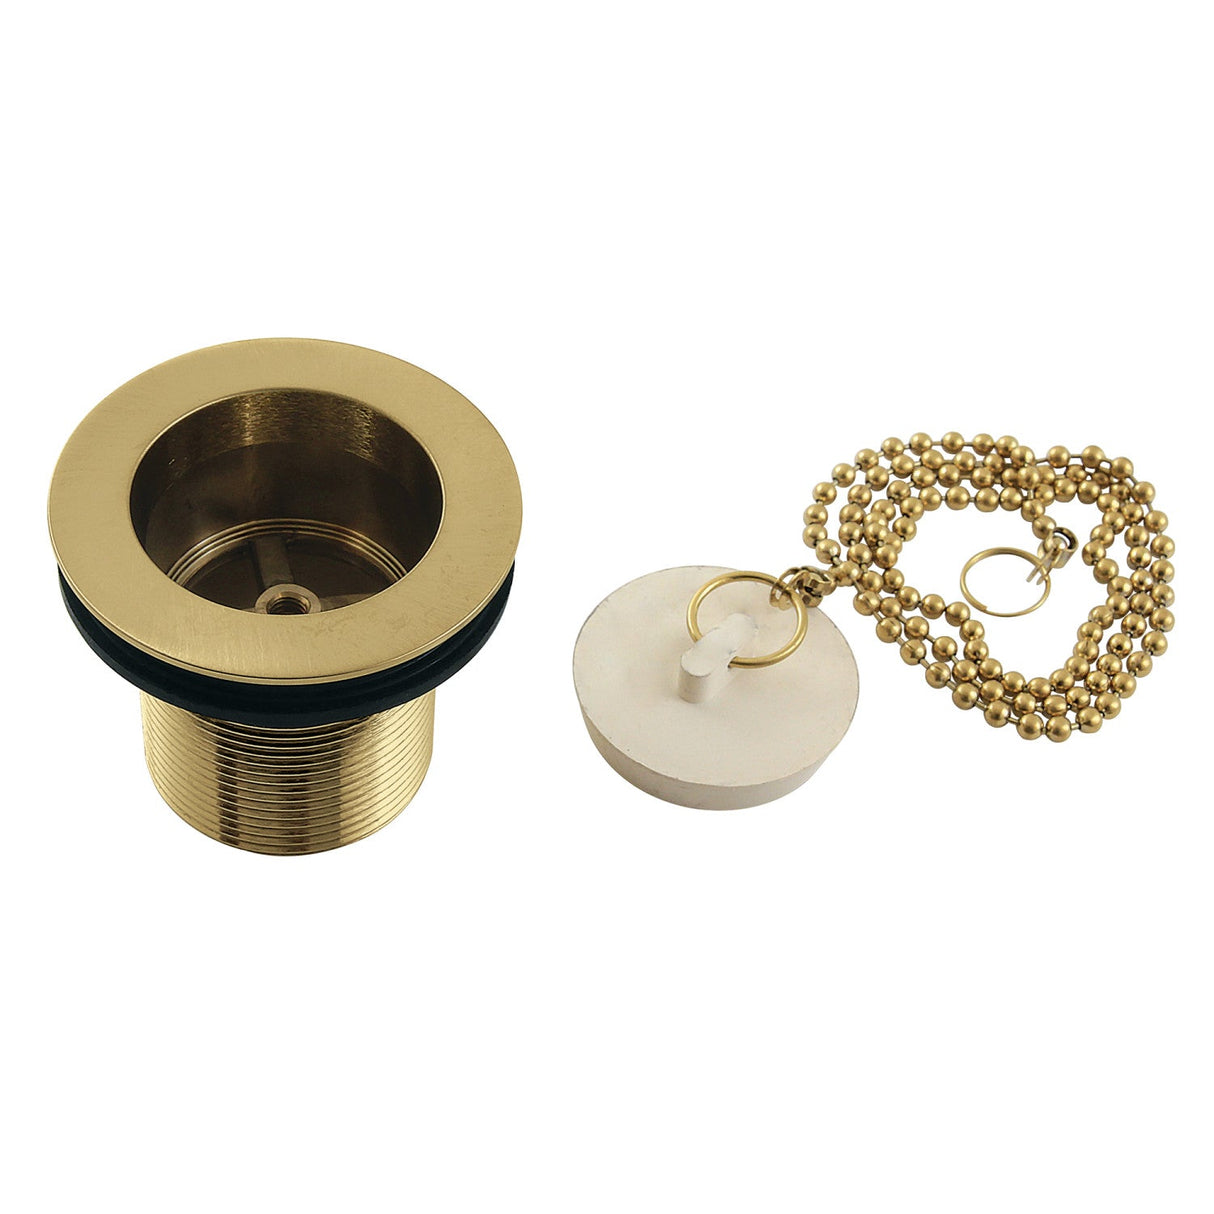 Made To Match DSP17SB 1-1/2-Inch Chain and Stopper Tub Drain with 1-3/4-Inch Body Thread, Brushed Brass